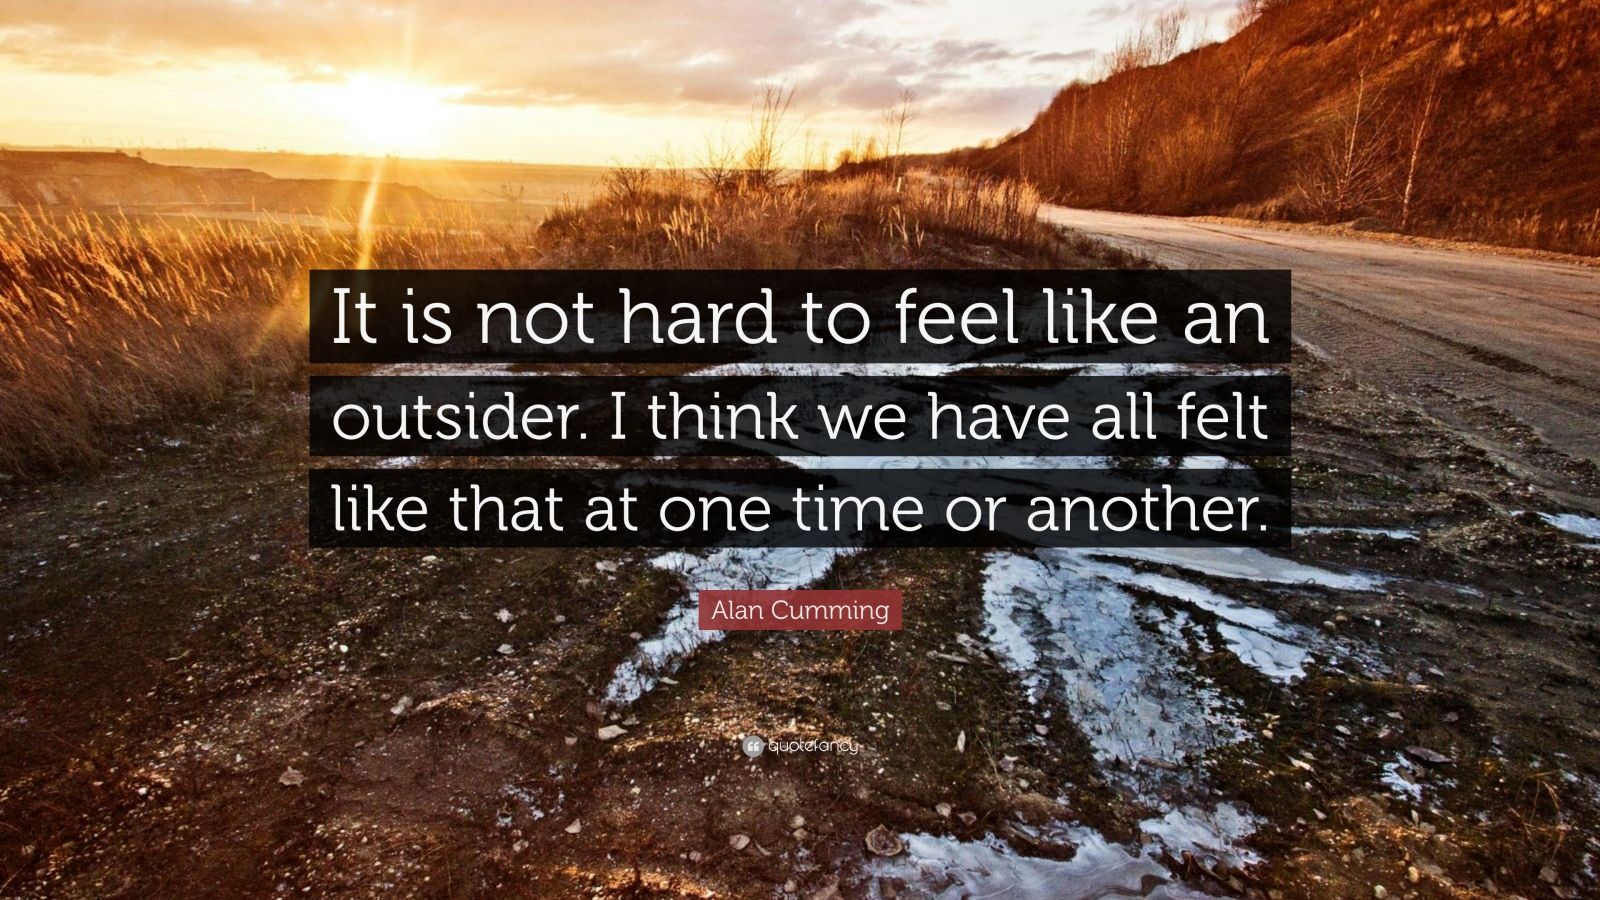 Alan Cumming Quote: “It is not hard to feel like an outsider. I think ...